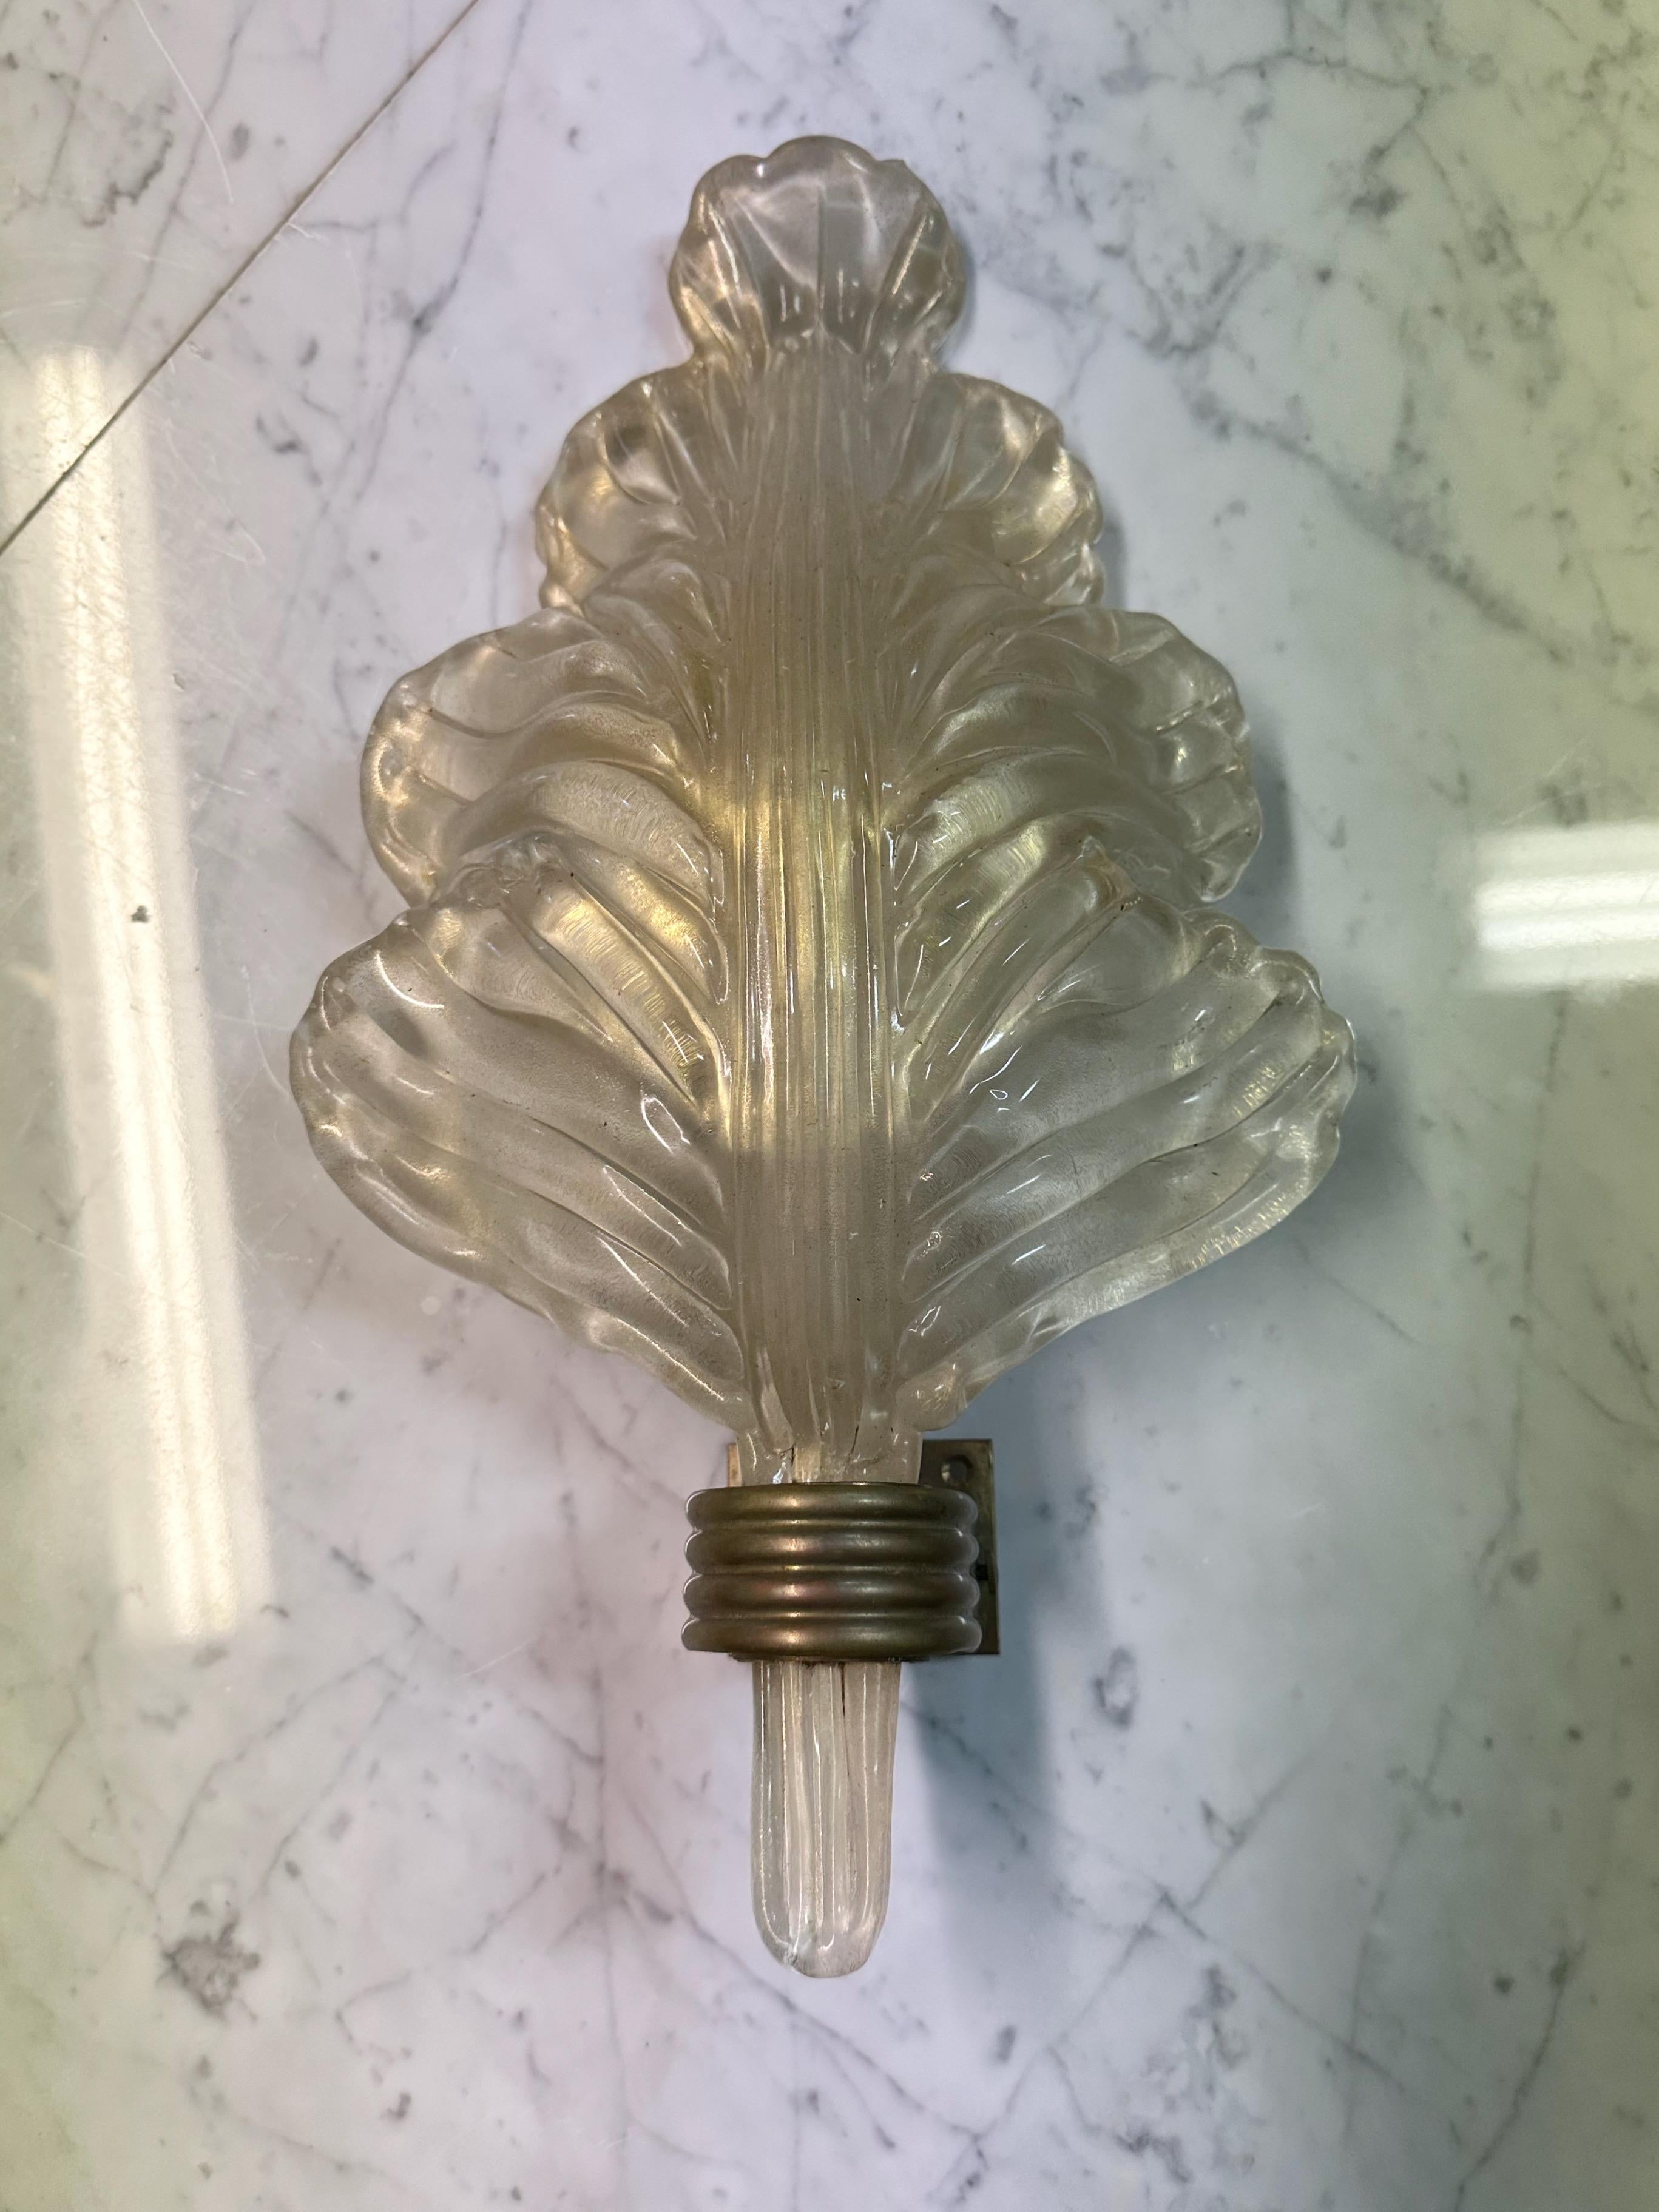 Mid Century sconce by Italian artist Ercole Barovier (1889-1974) for Barovier & Toso. With a glass shade formed into a leaf shape and having a brass backing. The oversized leaf is Murano glass with gold specks throughout. A single candelabra bulb at